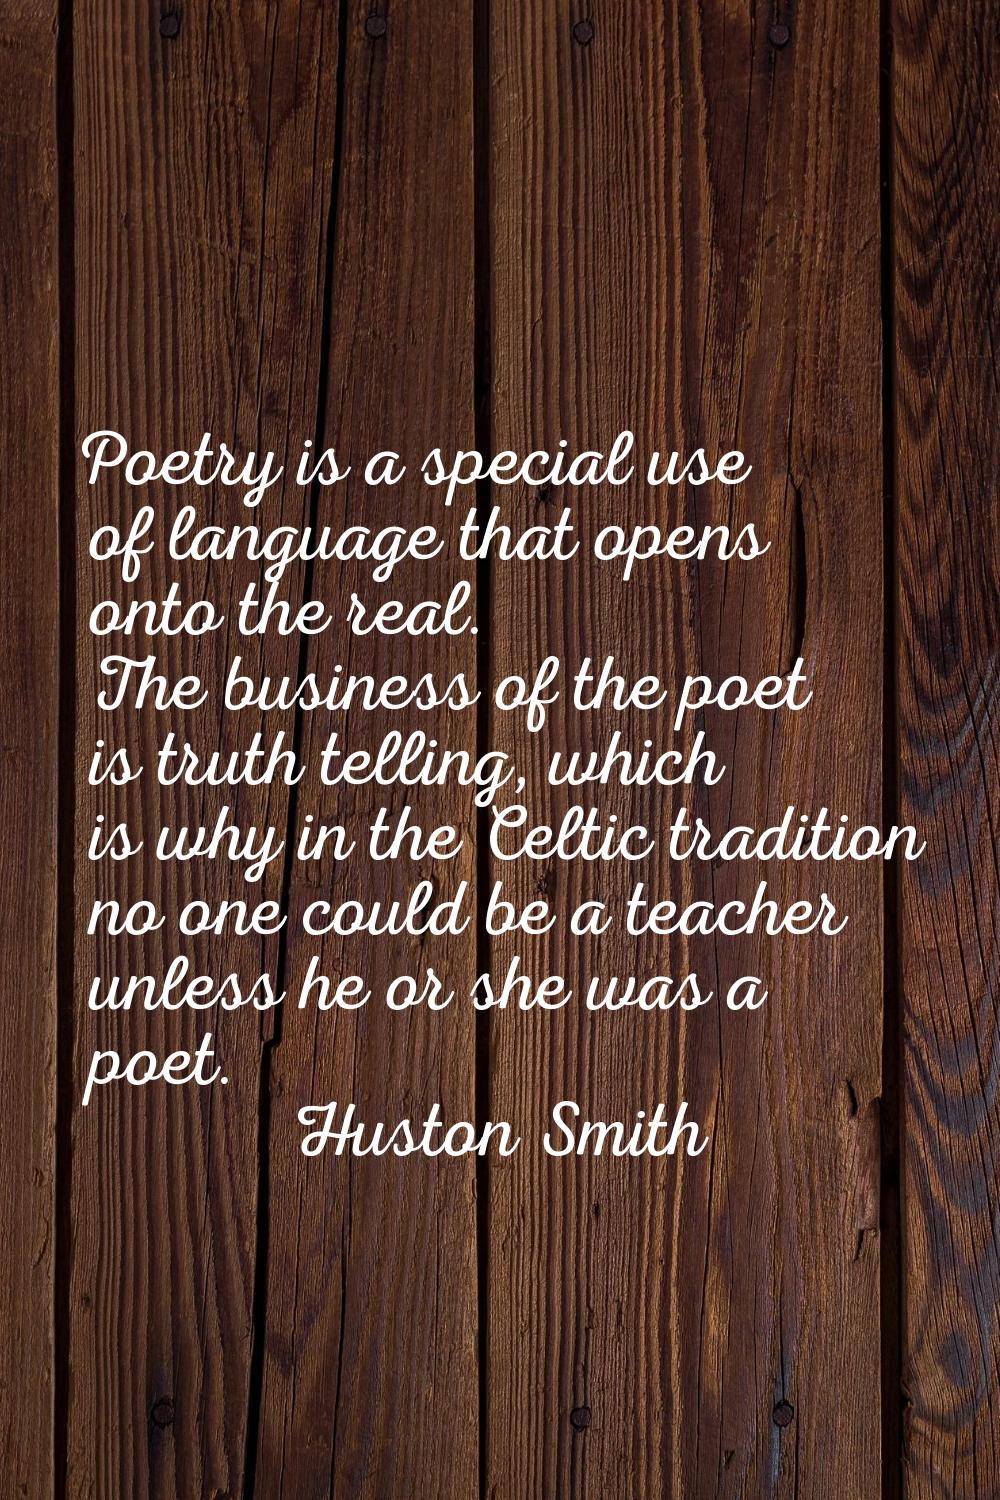 Poetry is a special use of language that opens onto the real. The business of the poet is truth tel